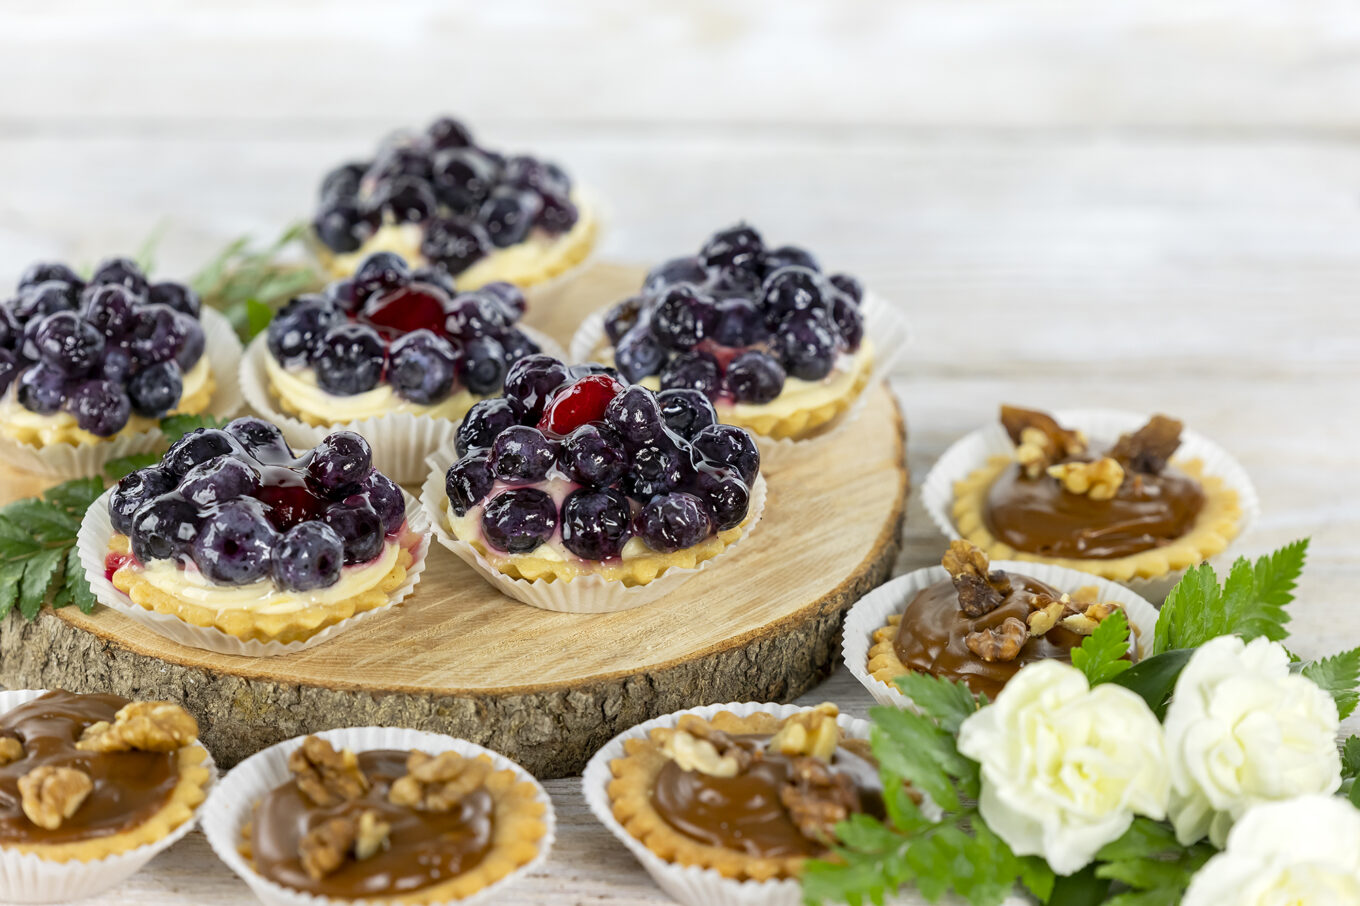 mini tarts Cukiernia Jacek Placek is synonymous with the taste of homemade cakes made from natural products.